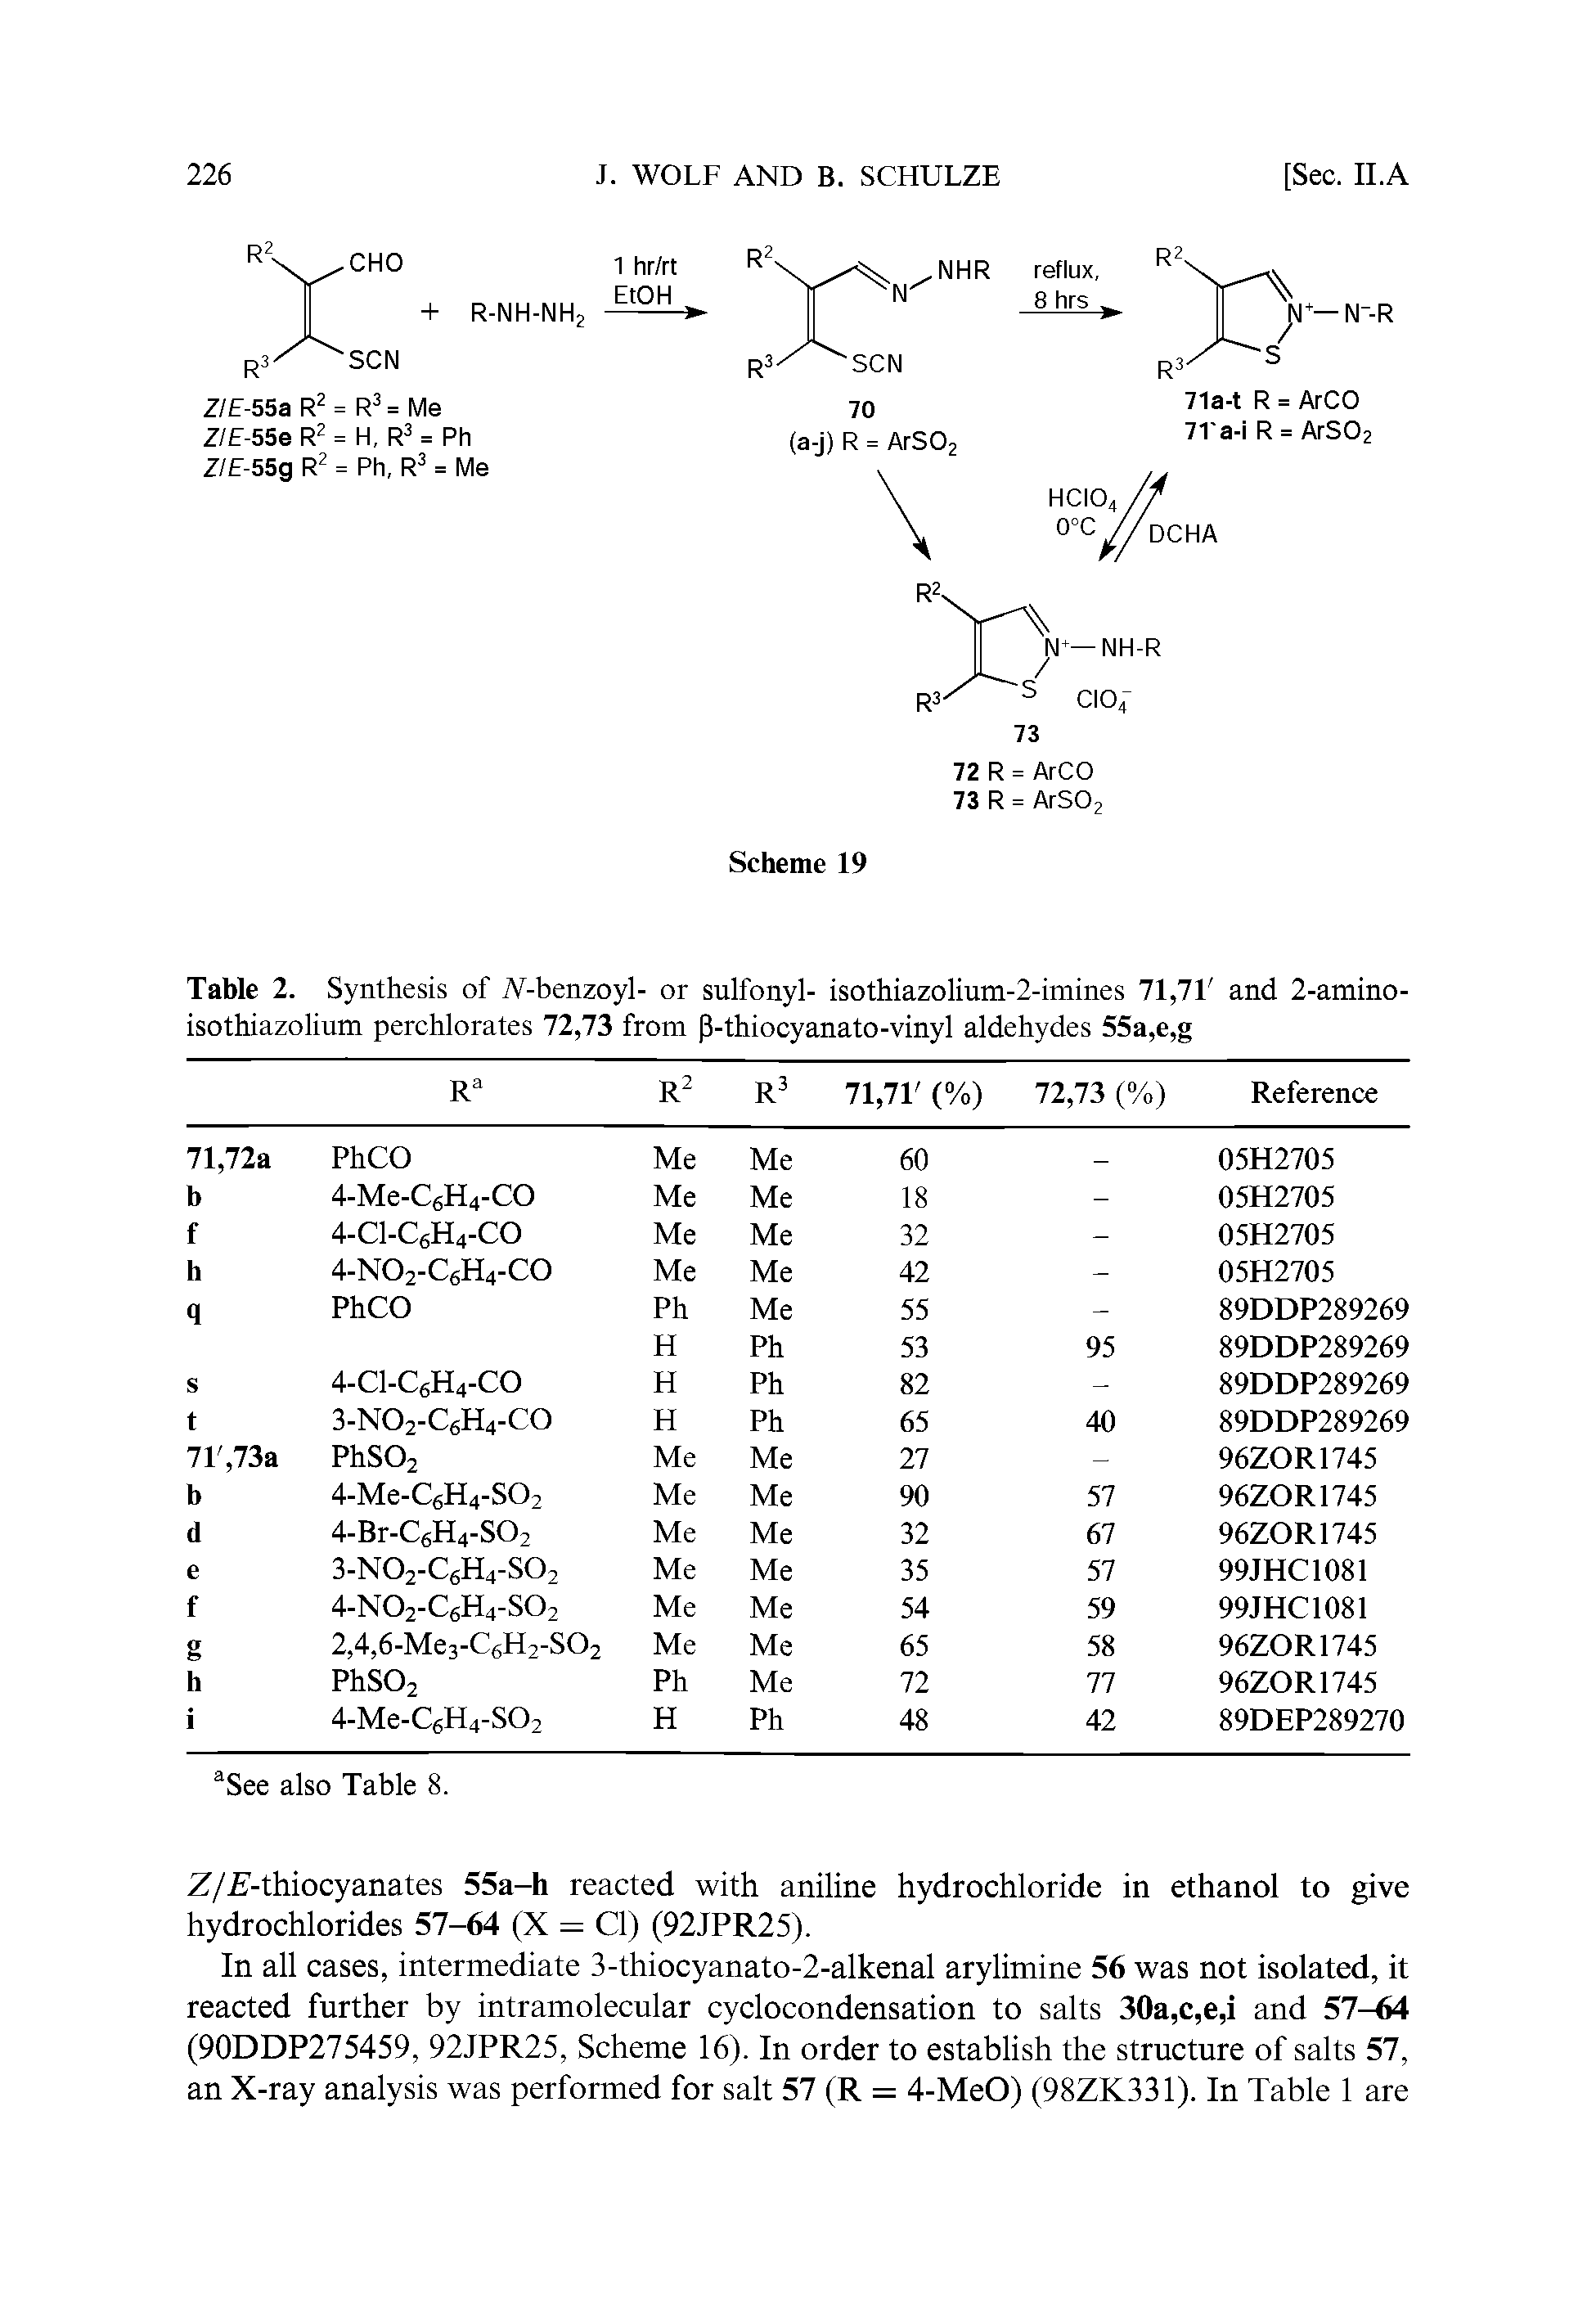 Table 2. Synthesis of IV-benzoyl- or sulfonyl- isothiazolium-2-imines 71,71 and 2-amino-isothiazolium perchlorates 72,73 from [3-thiocyanato-vinyl aldehydes 55a,e,g...